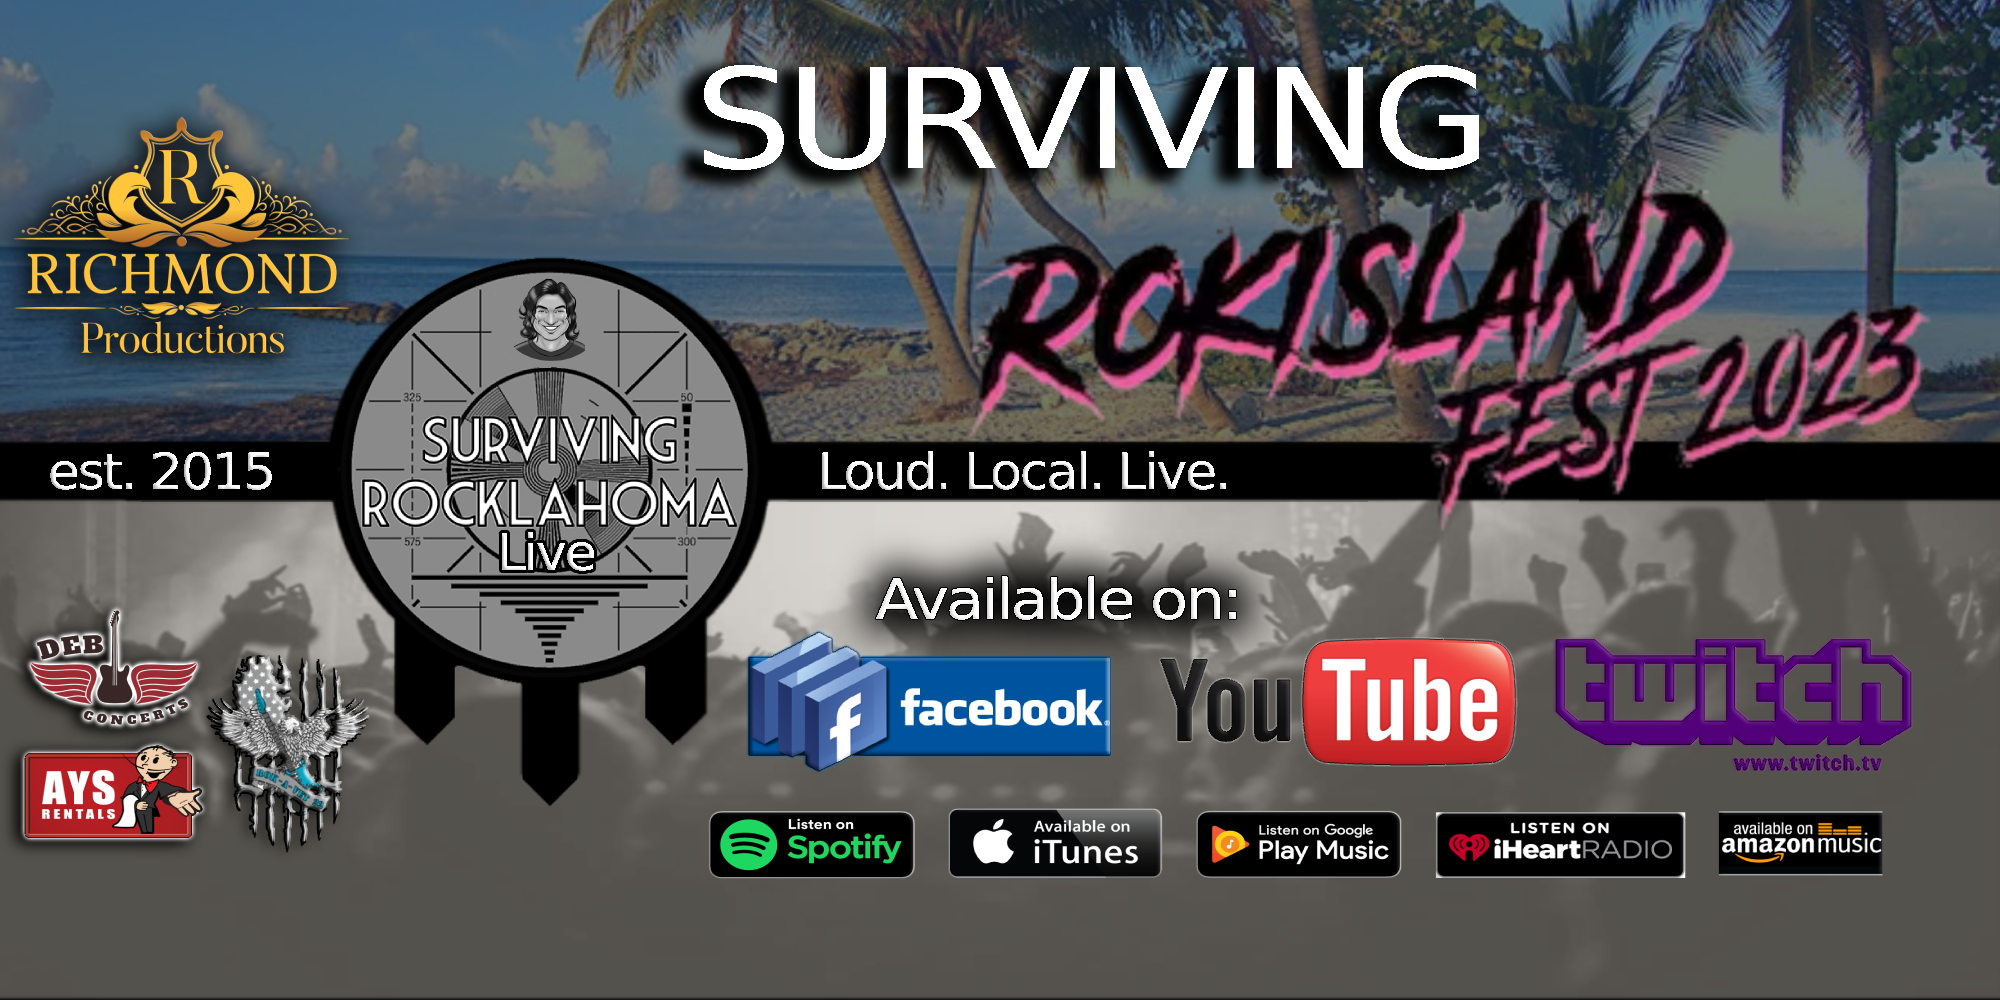 Surviving RokIsland: The Eve of Departure